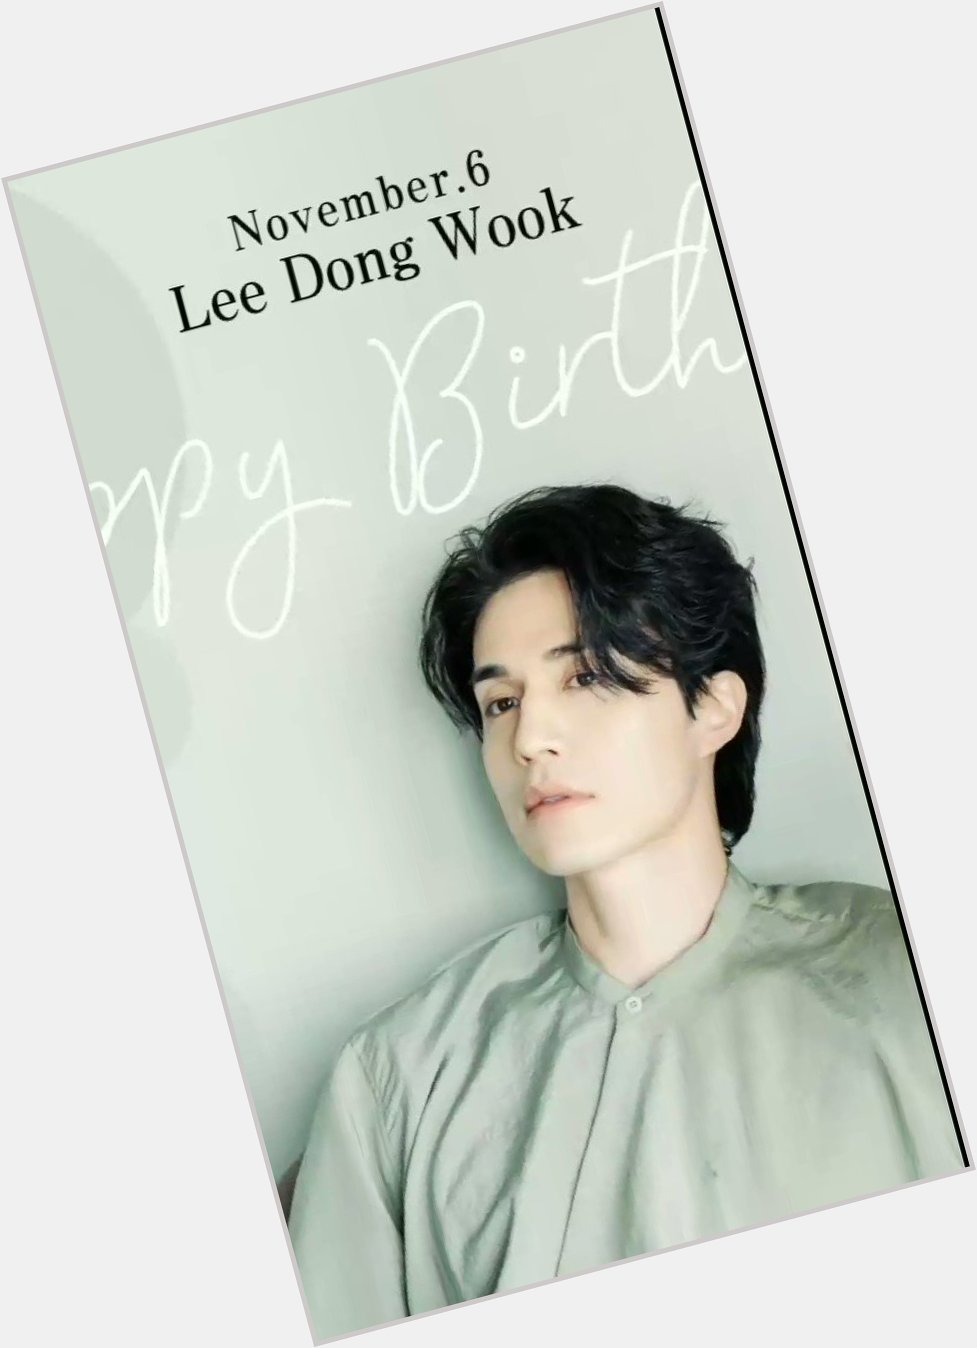  happy birthday lee dong wook oppa wish you all the best i miss you   